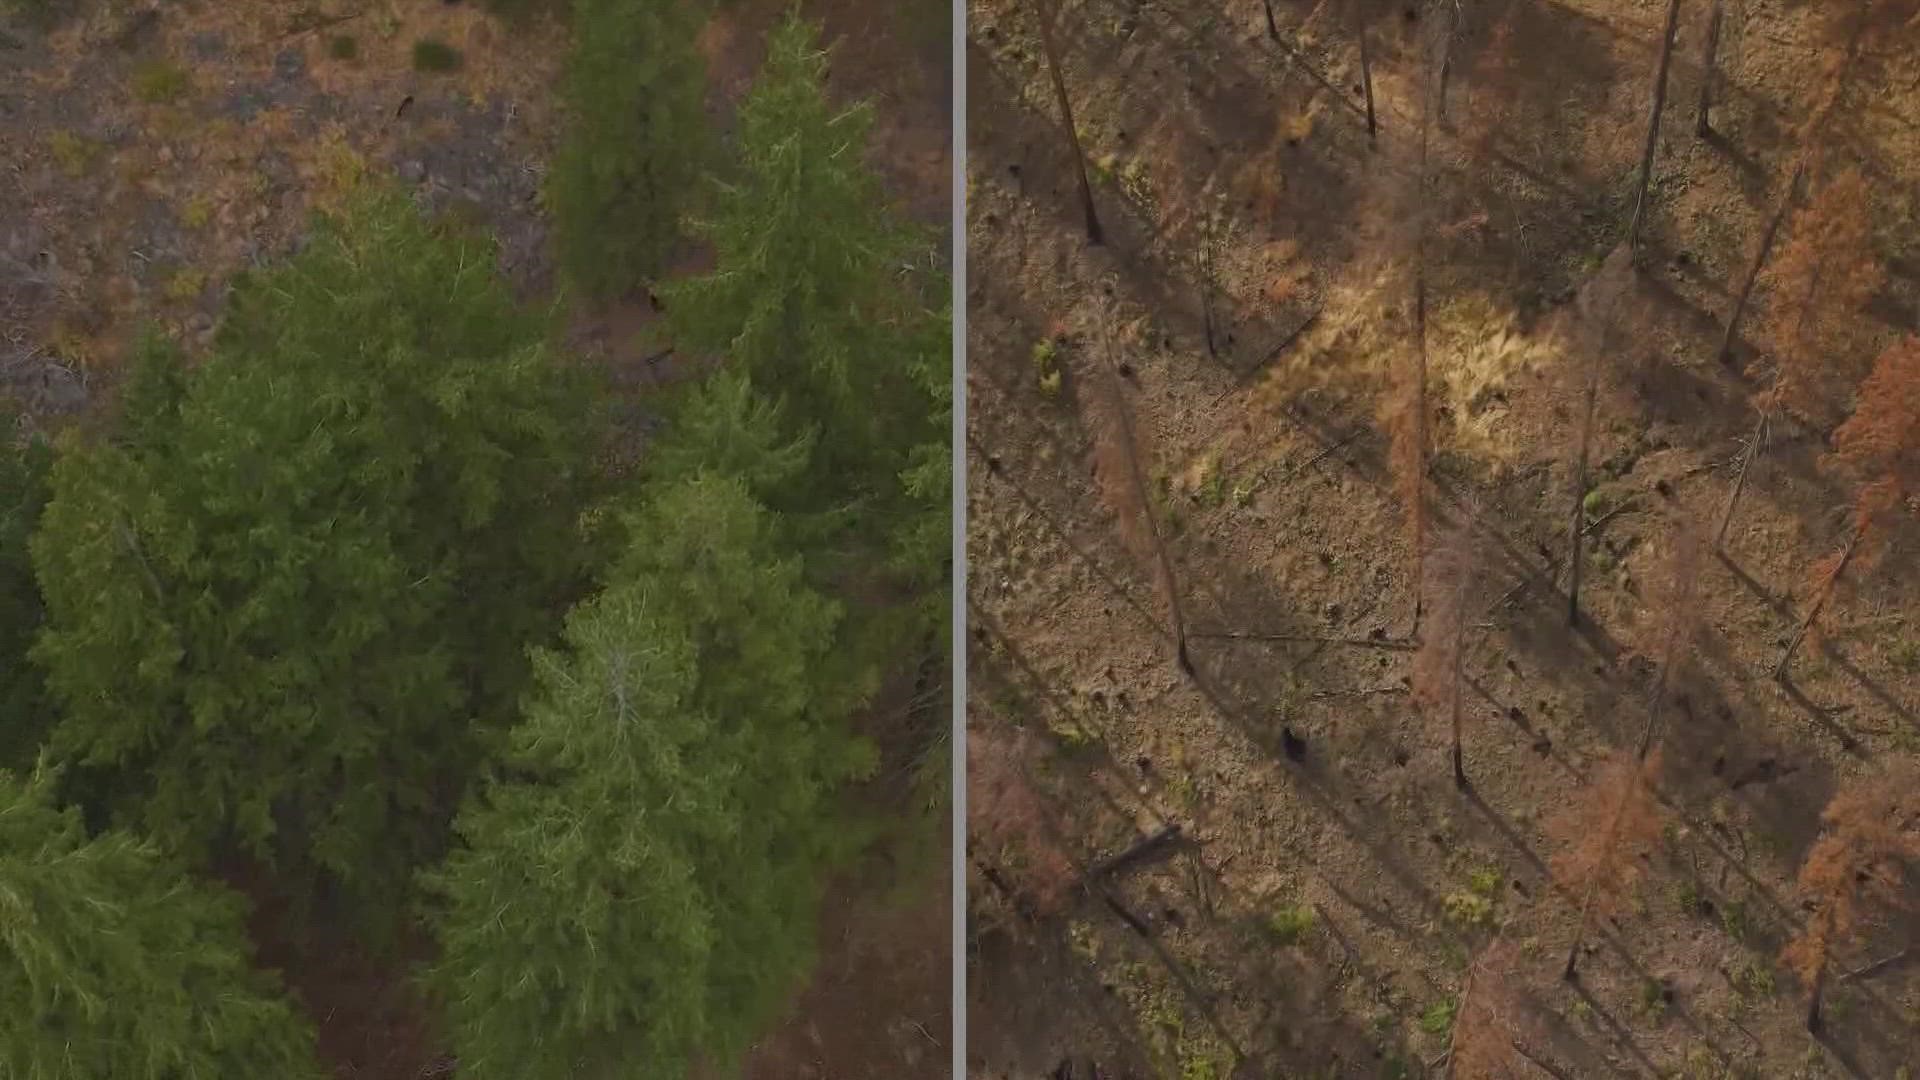 WA Department of Natural Resources and the US Forest Service say treated land burned in a healthier, more controlled way, protecting trees and resources.